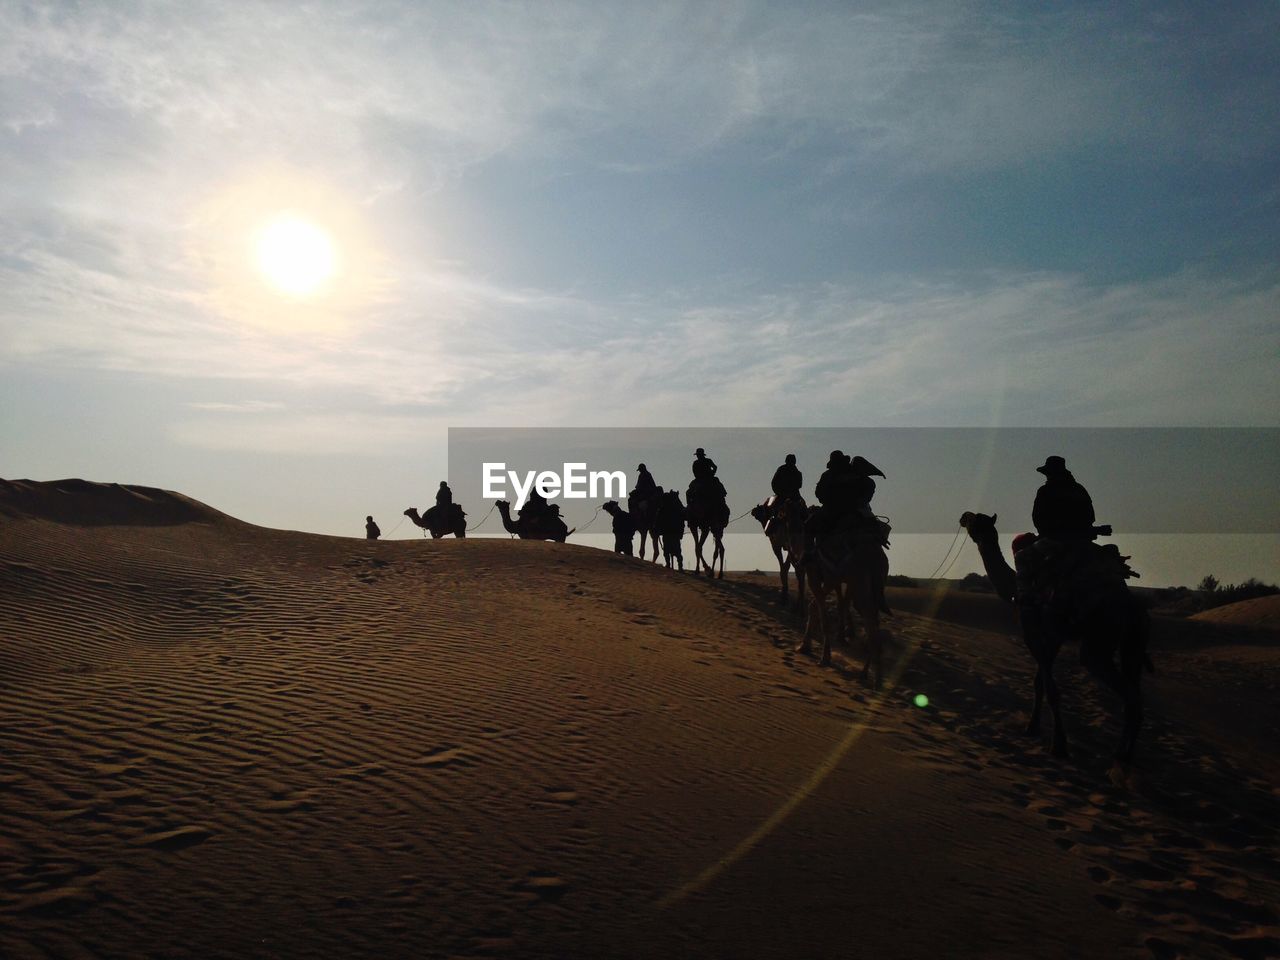 People riding on camels on sand dunes in desert